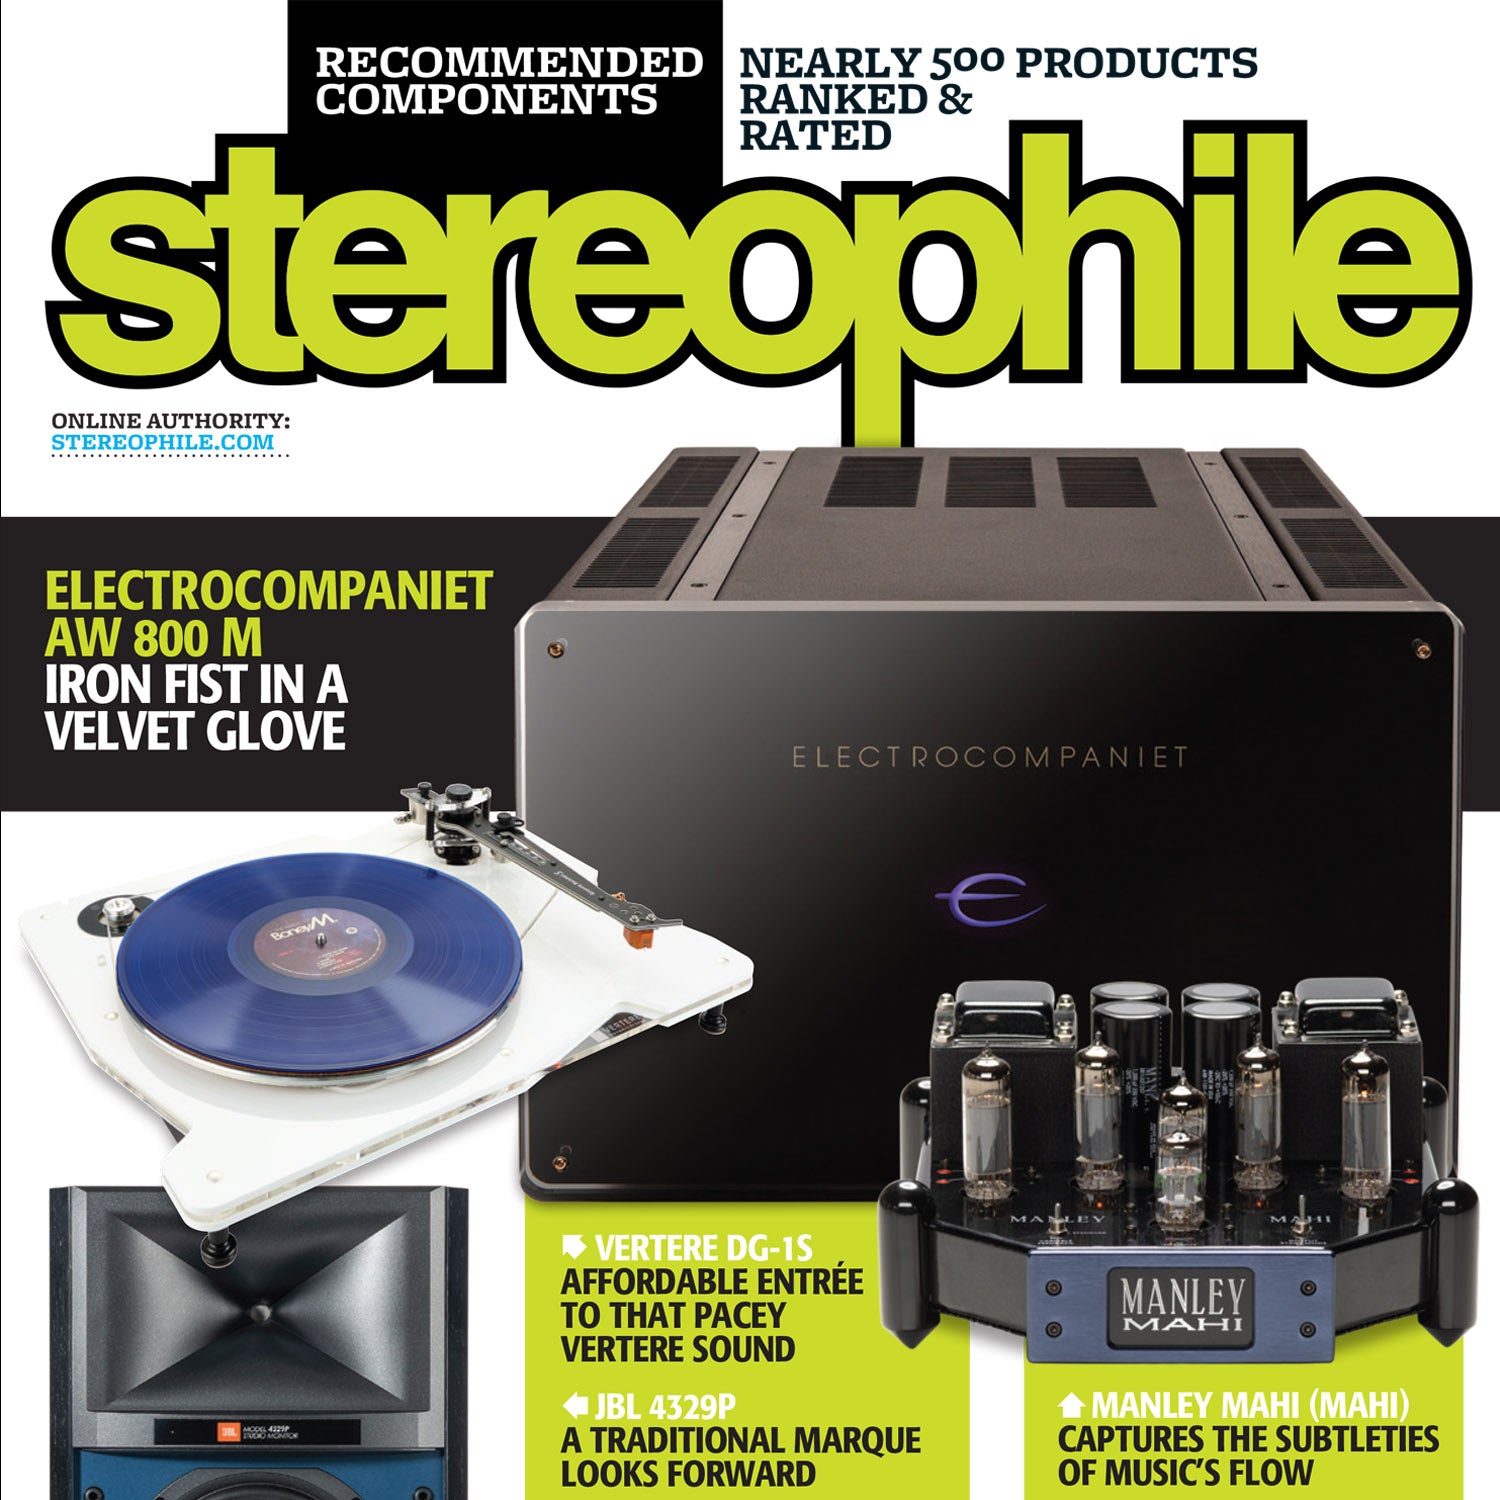 Stereophile review –